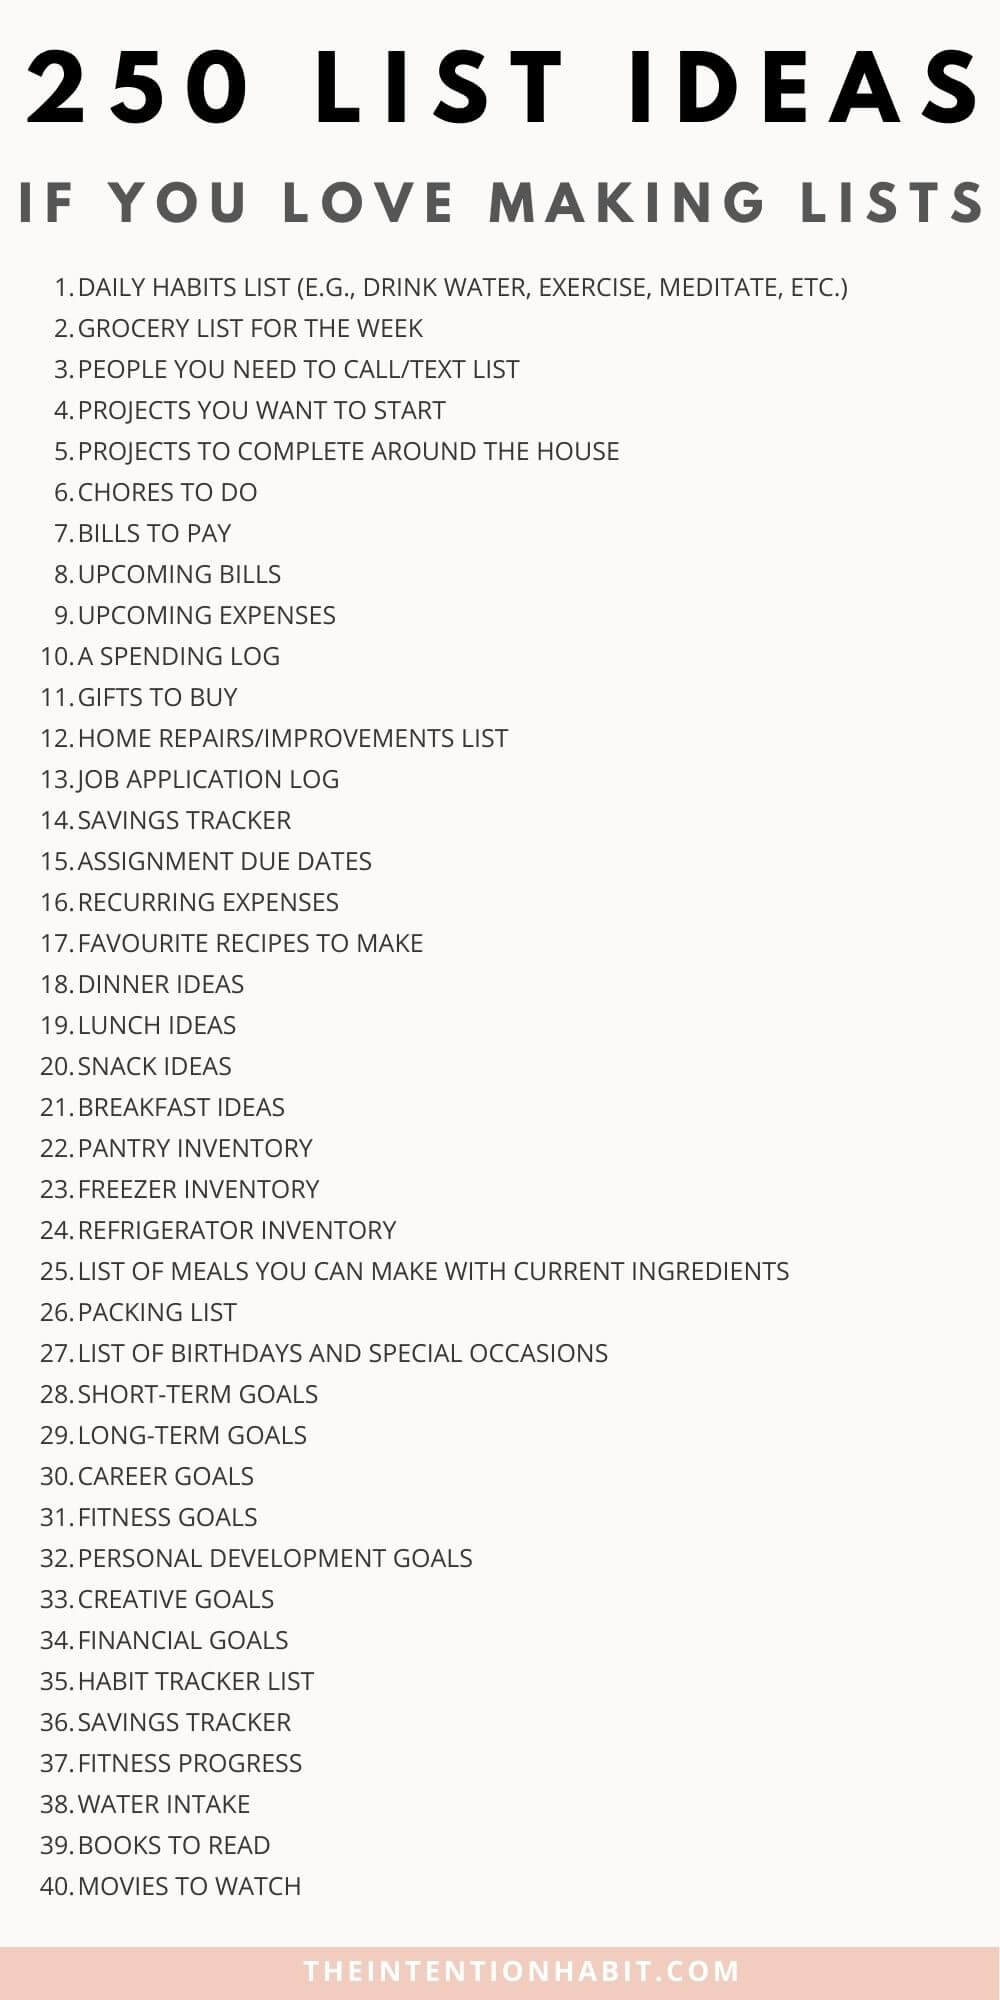 250 list ideas if you love making lists.